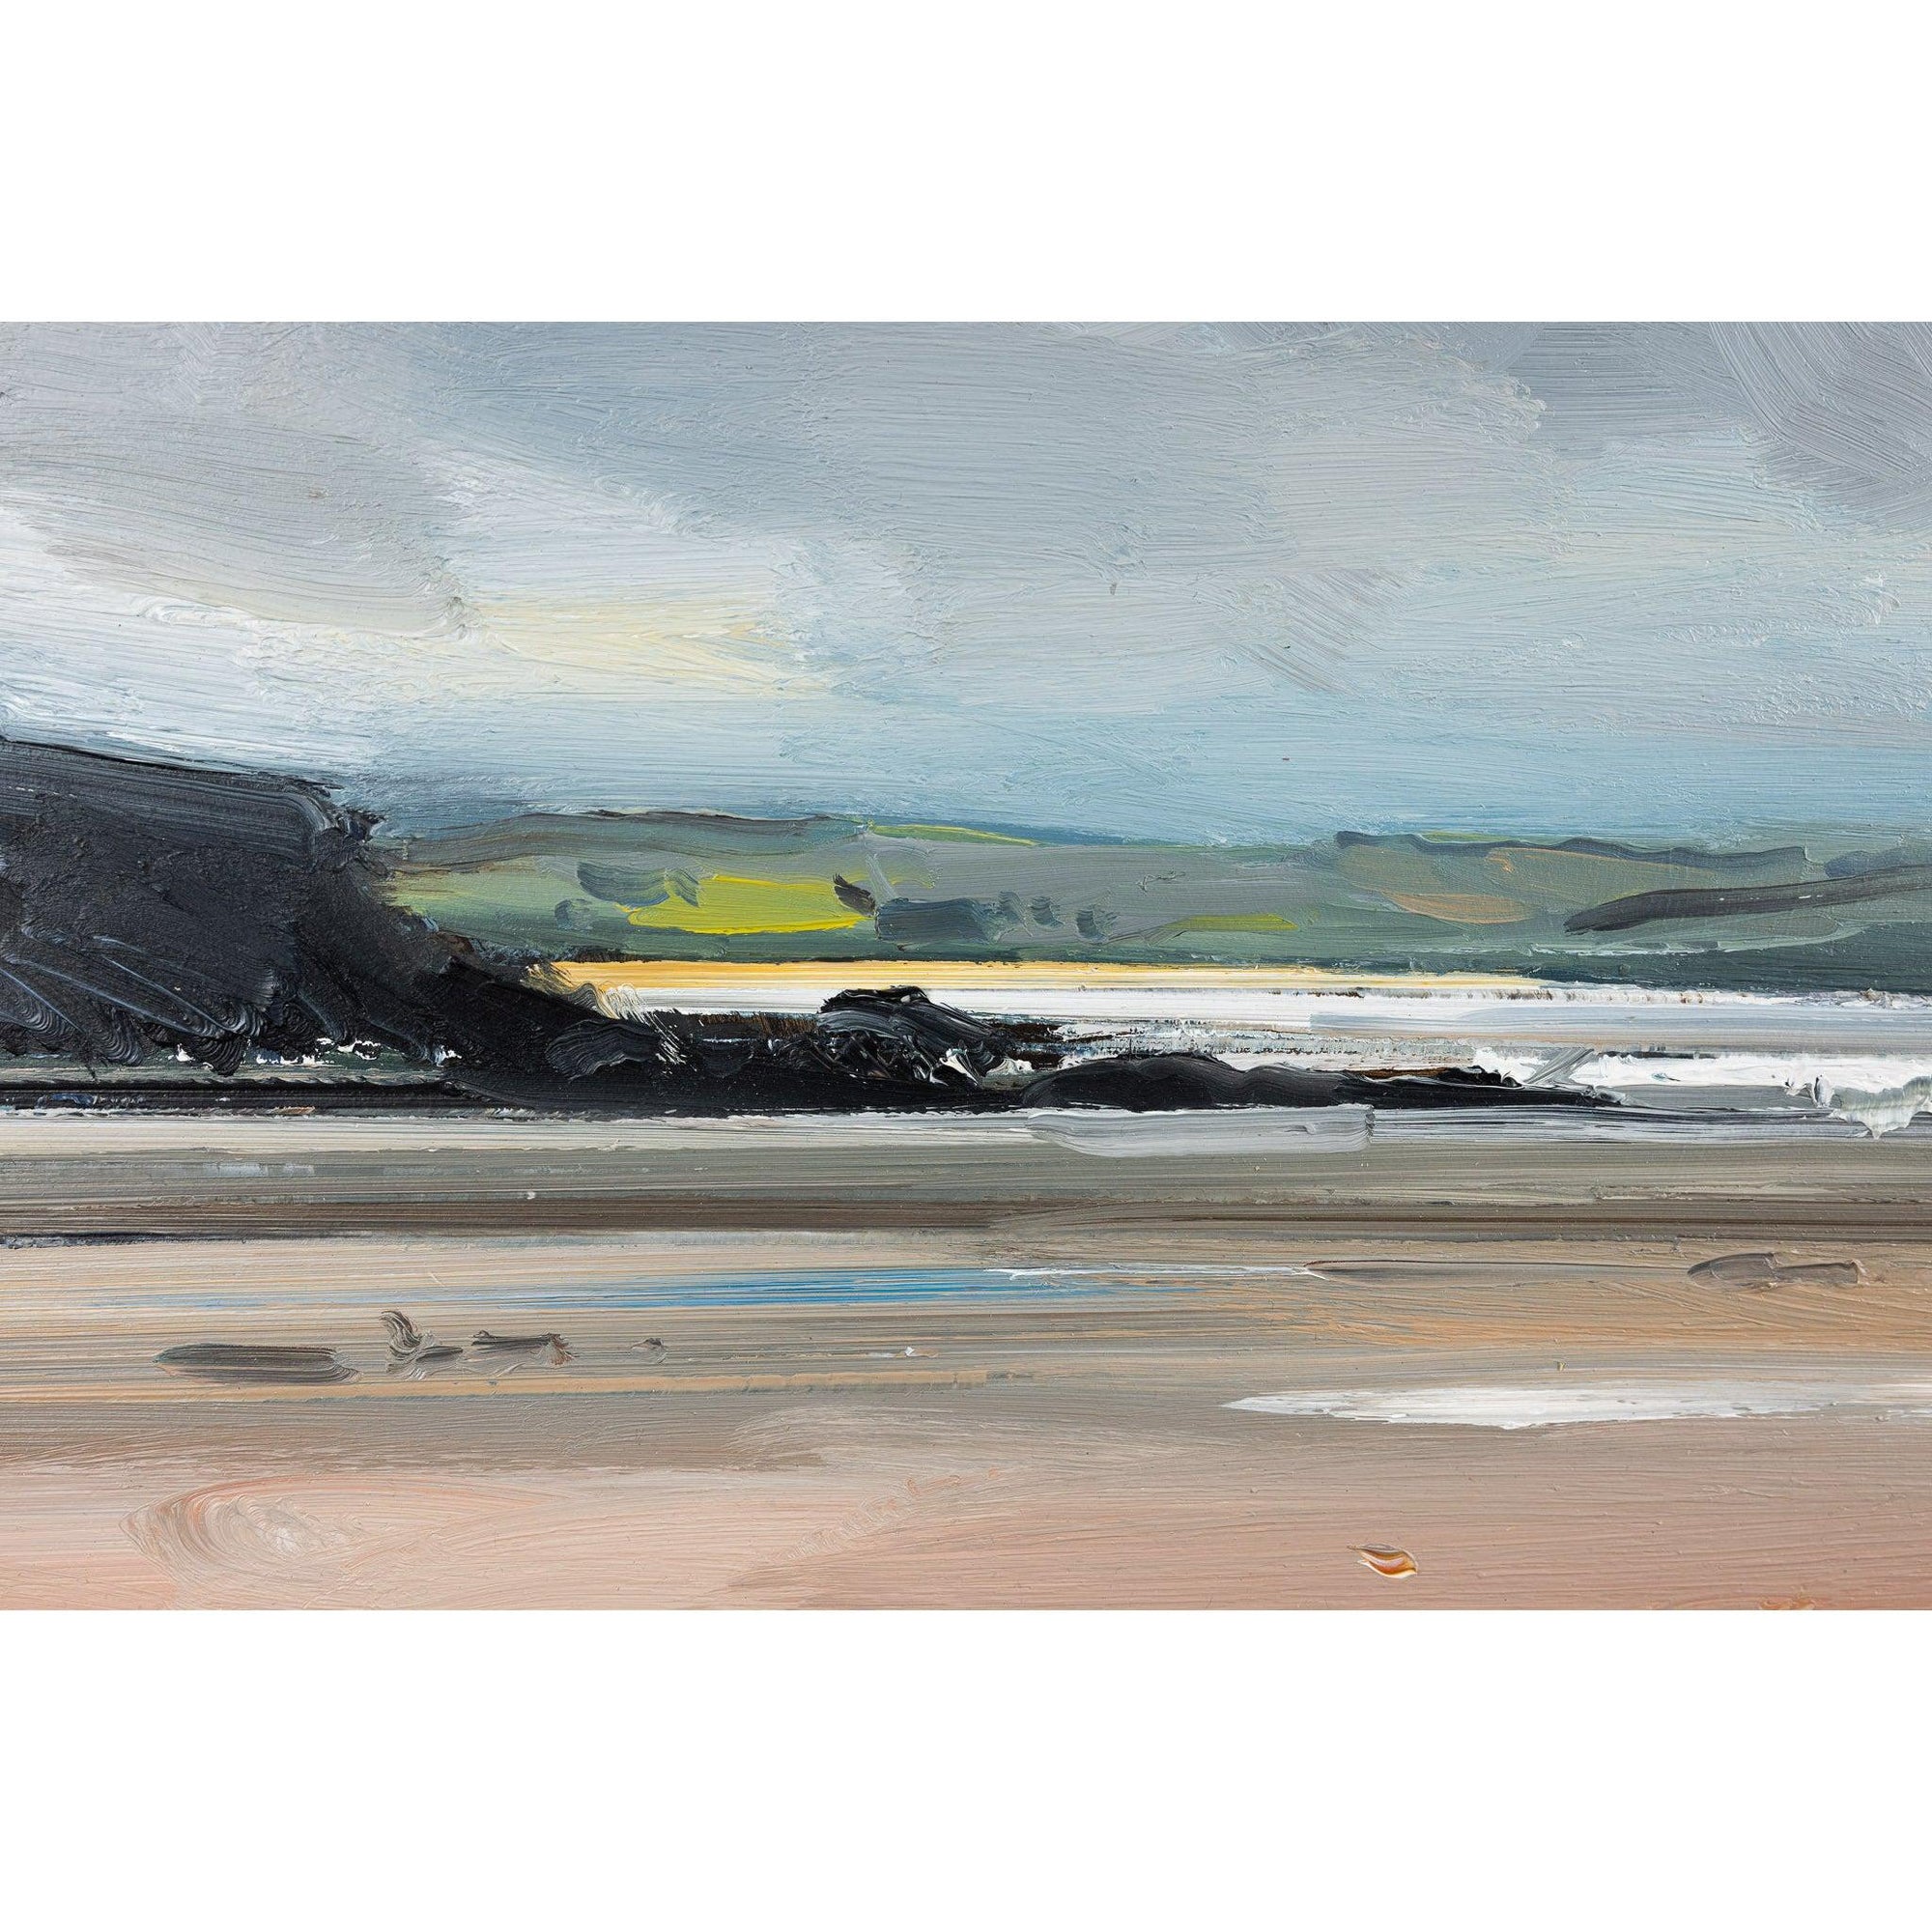 ‘Polzeath Beach on an Autumn day' oil on board original by David Atkins, available at Padstow Gallery, Cornwall